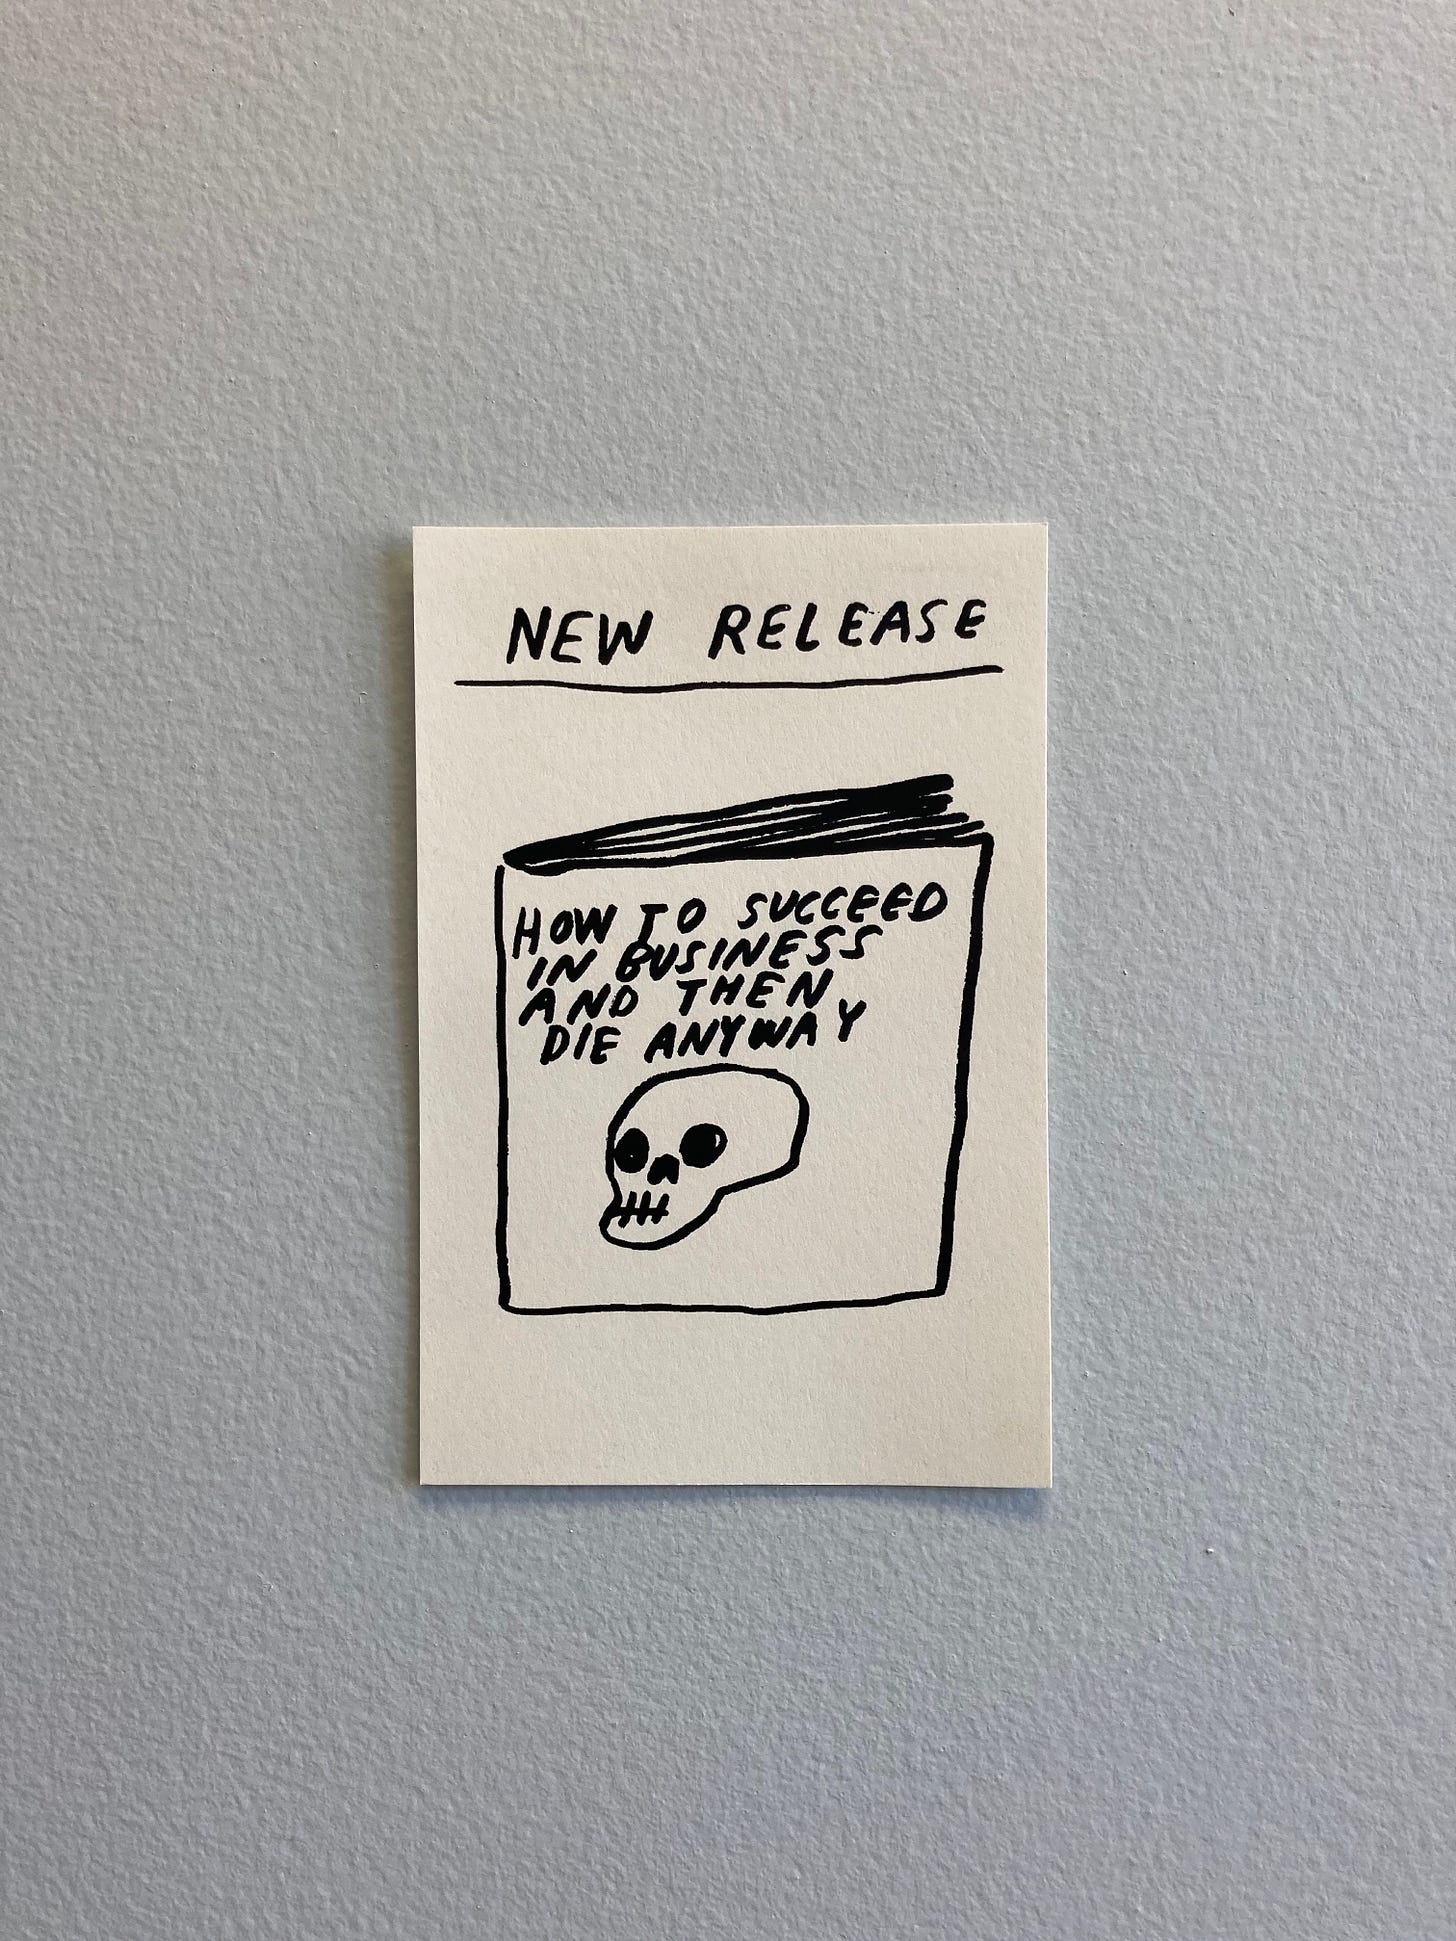 a postcard sketch of a book with a skull on its cover, titled "How To Succeed in Business and Then Die Anyway", by the artist Nat Russell 